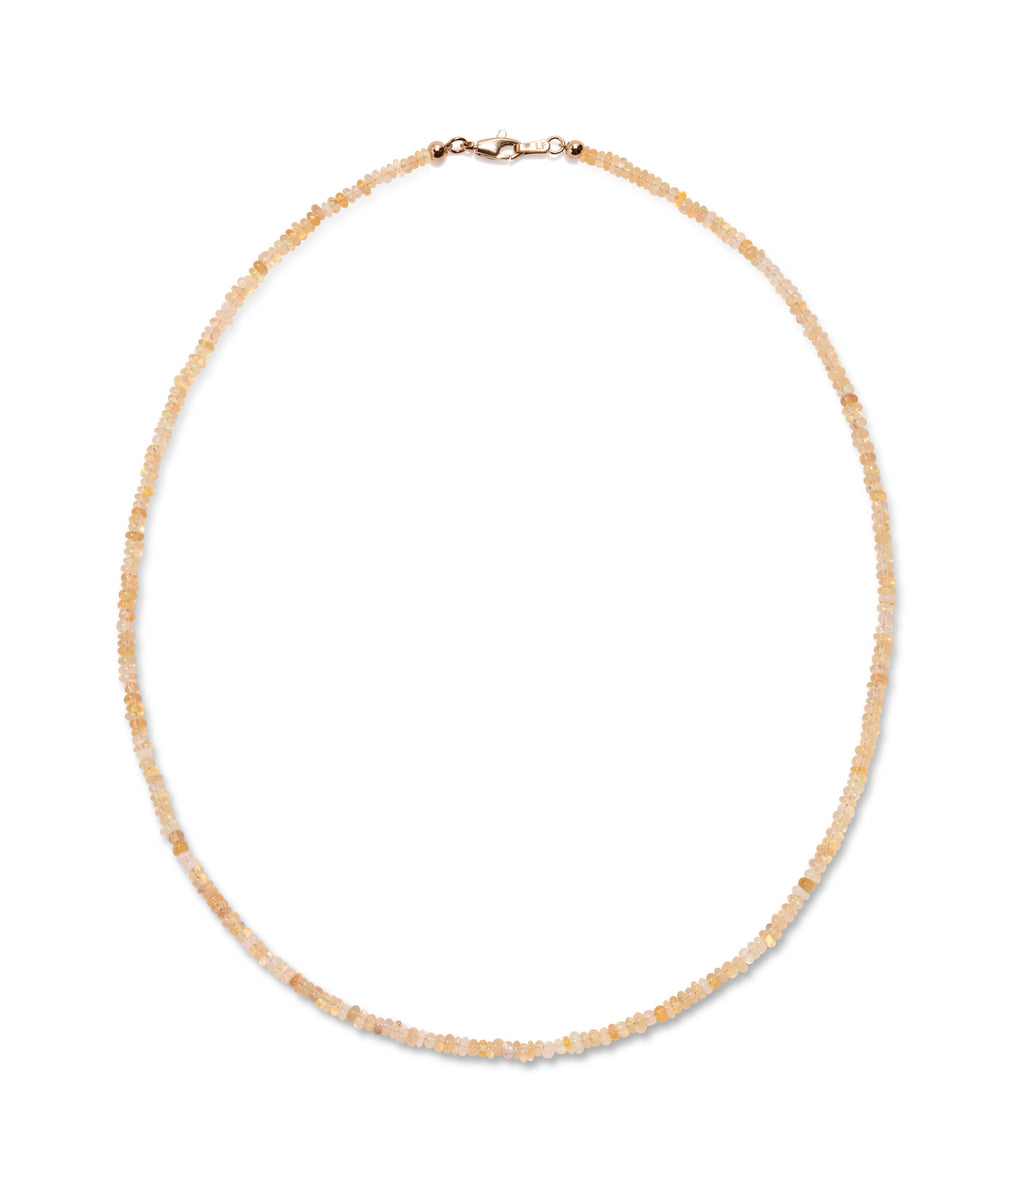 Tiny Beaded 14k Gold Necklace in Opal | Lizzie Fortunato | Lizzie